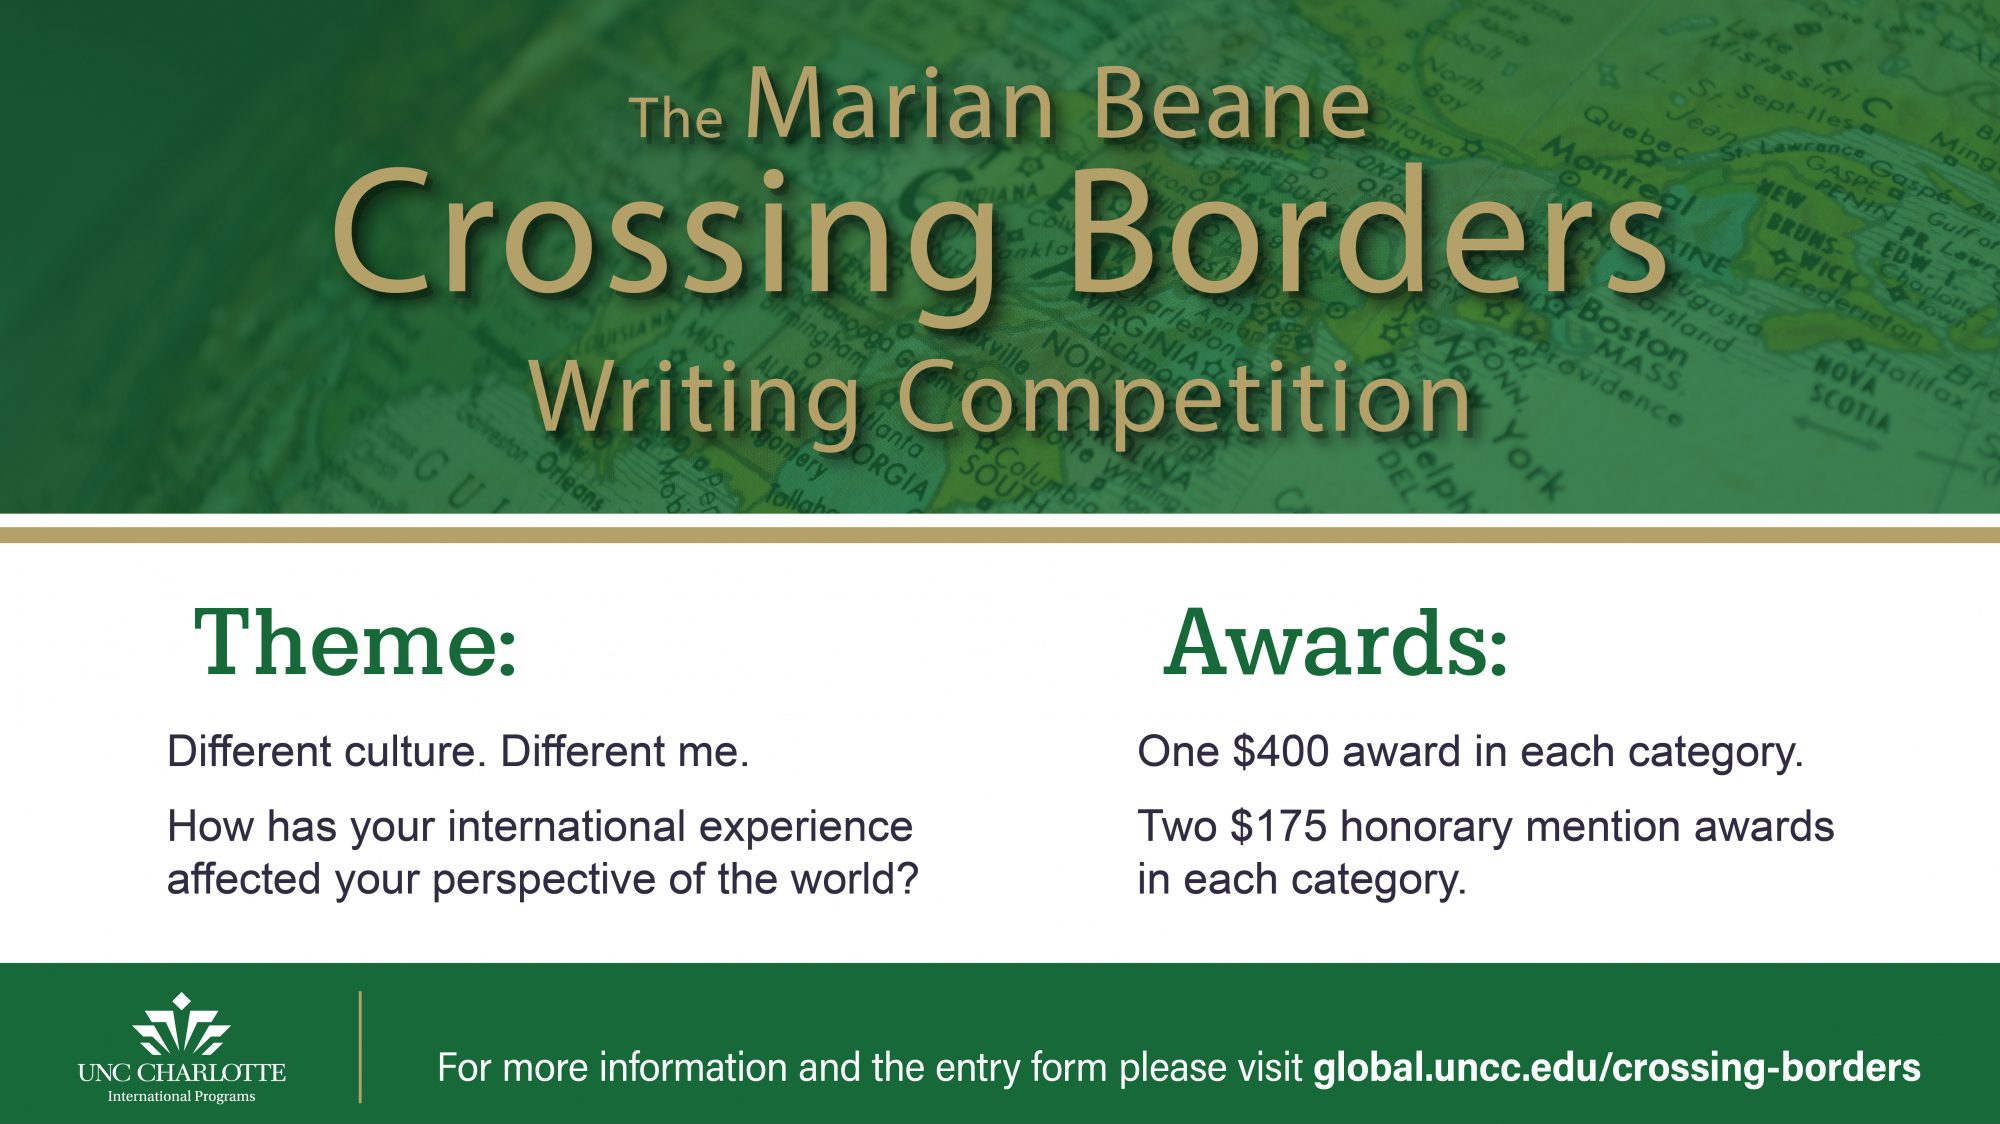 MB Crossing Borders Writing Competition Image